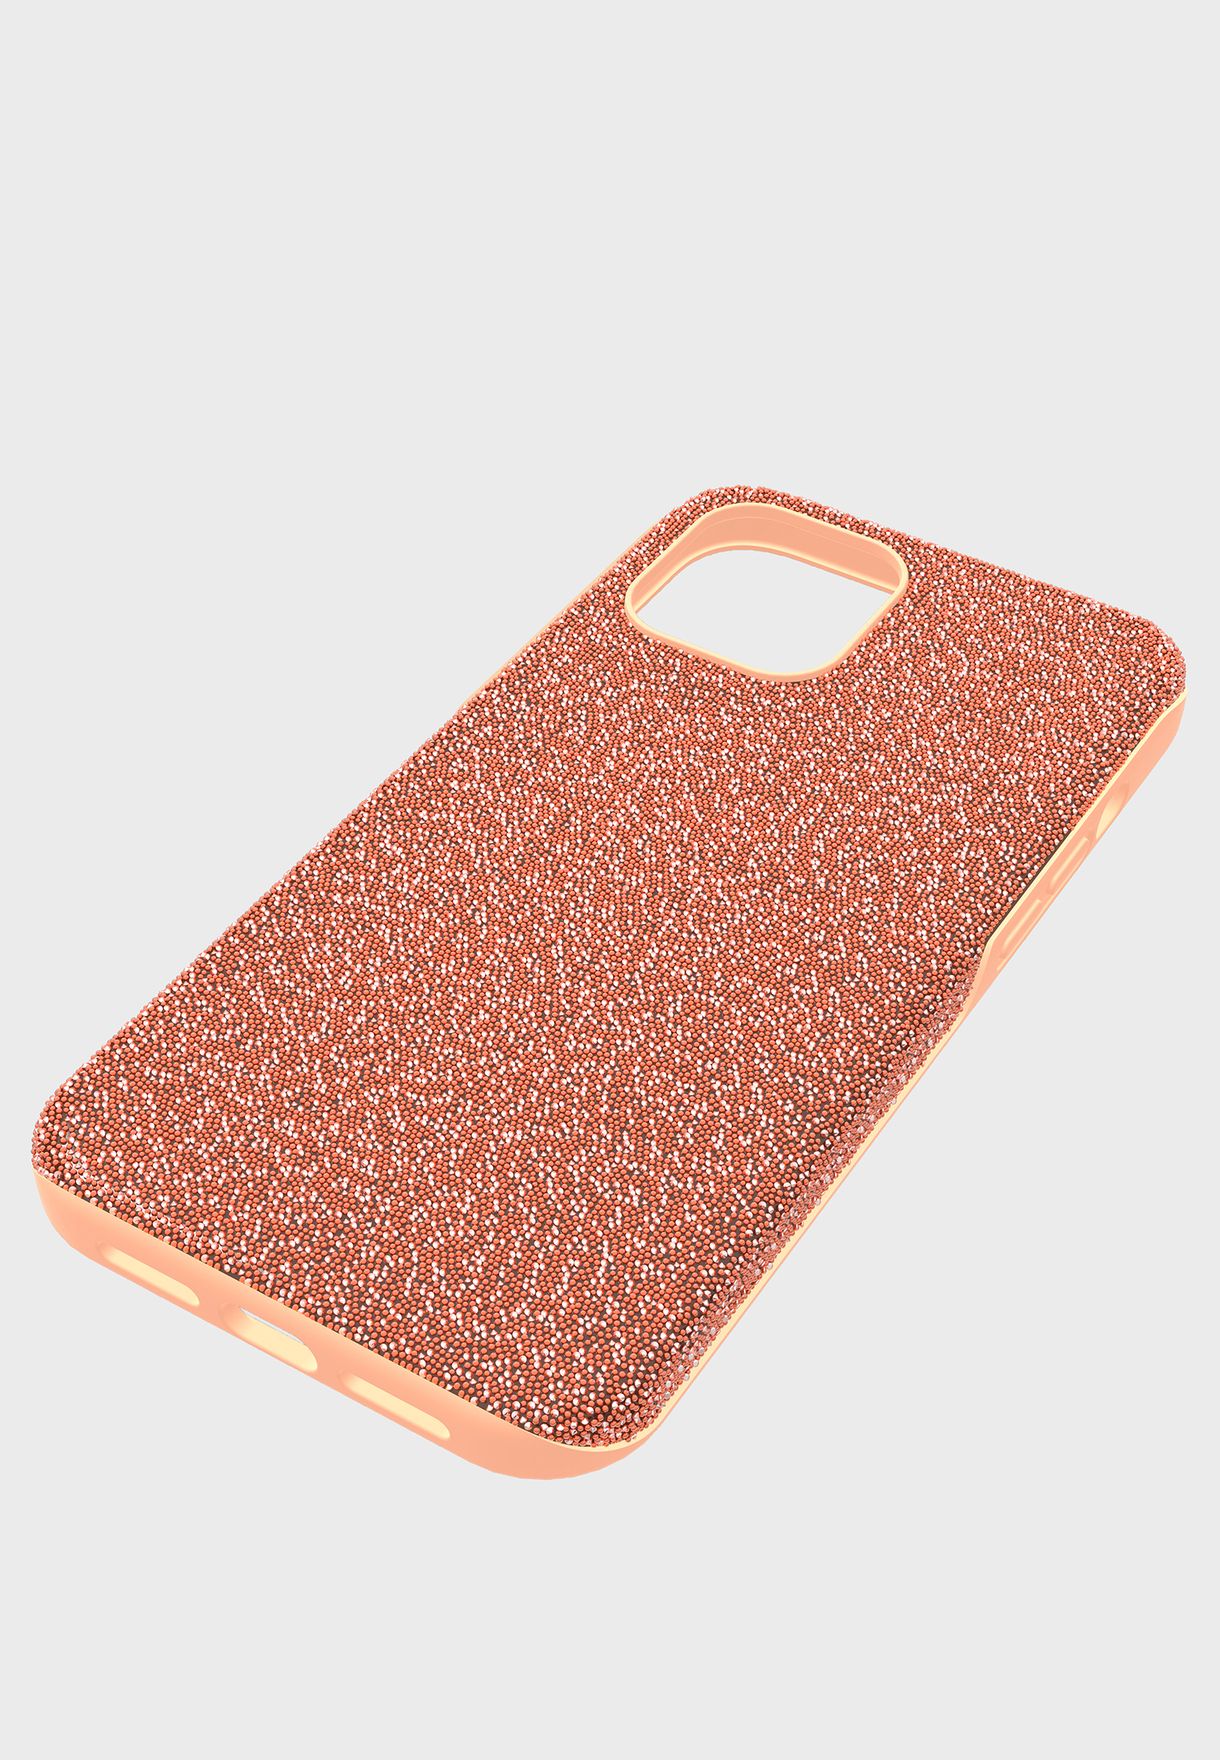 High Iphone 12 Pro Max Case